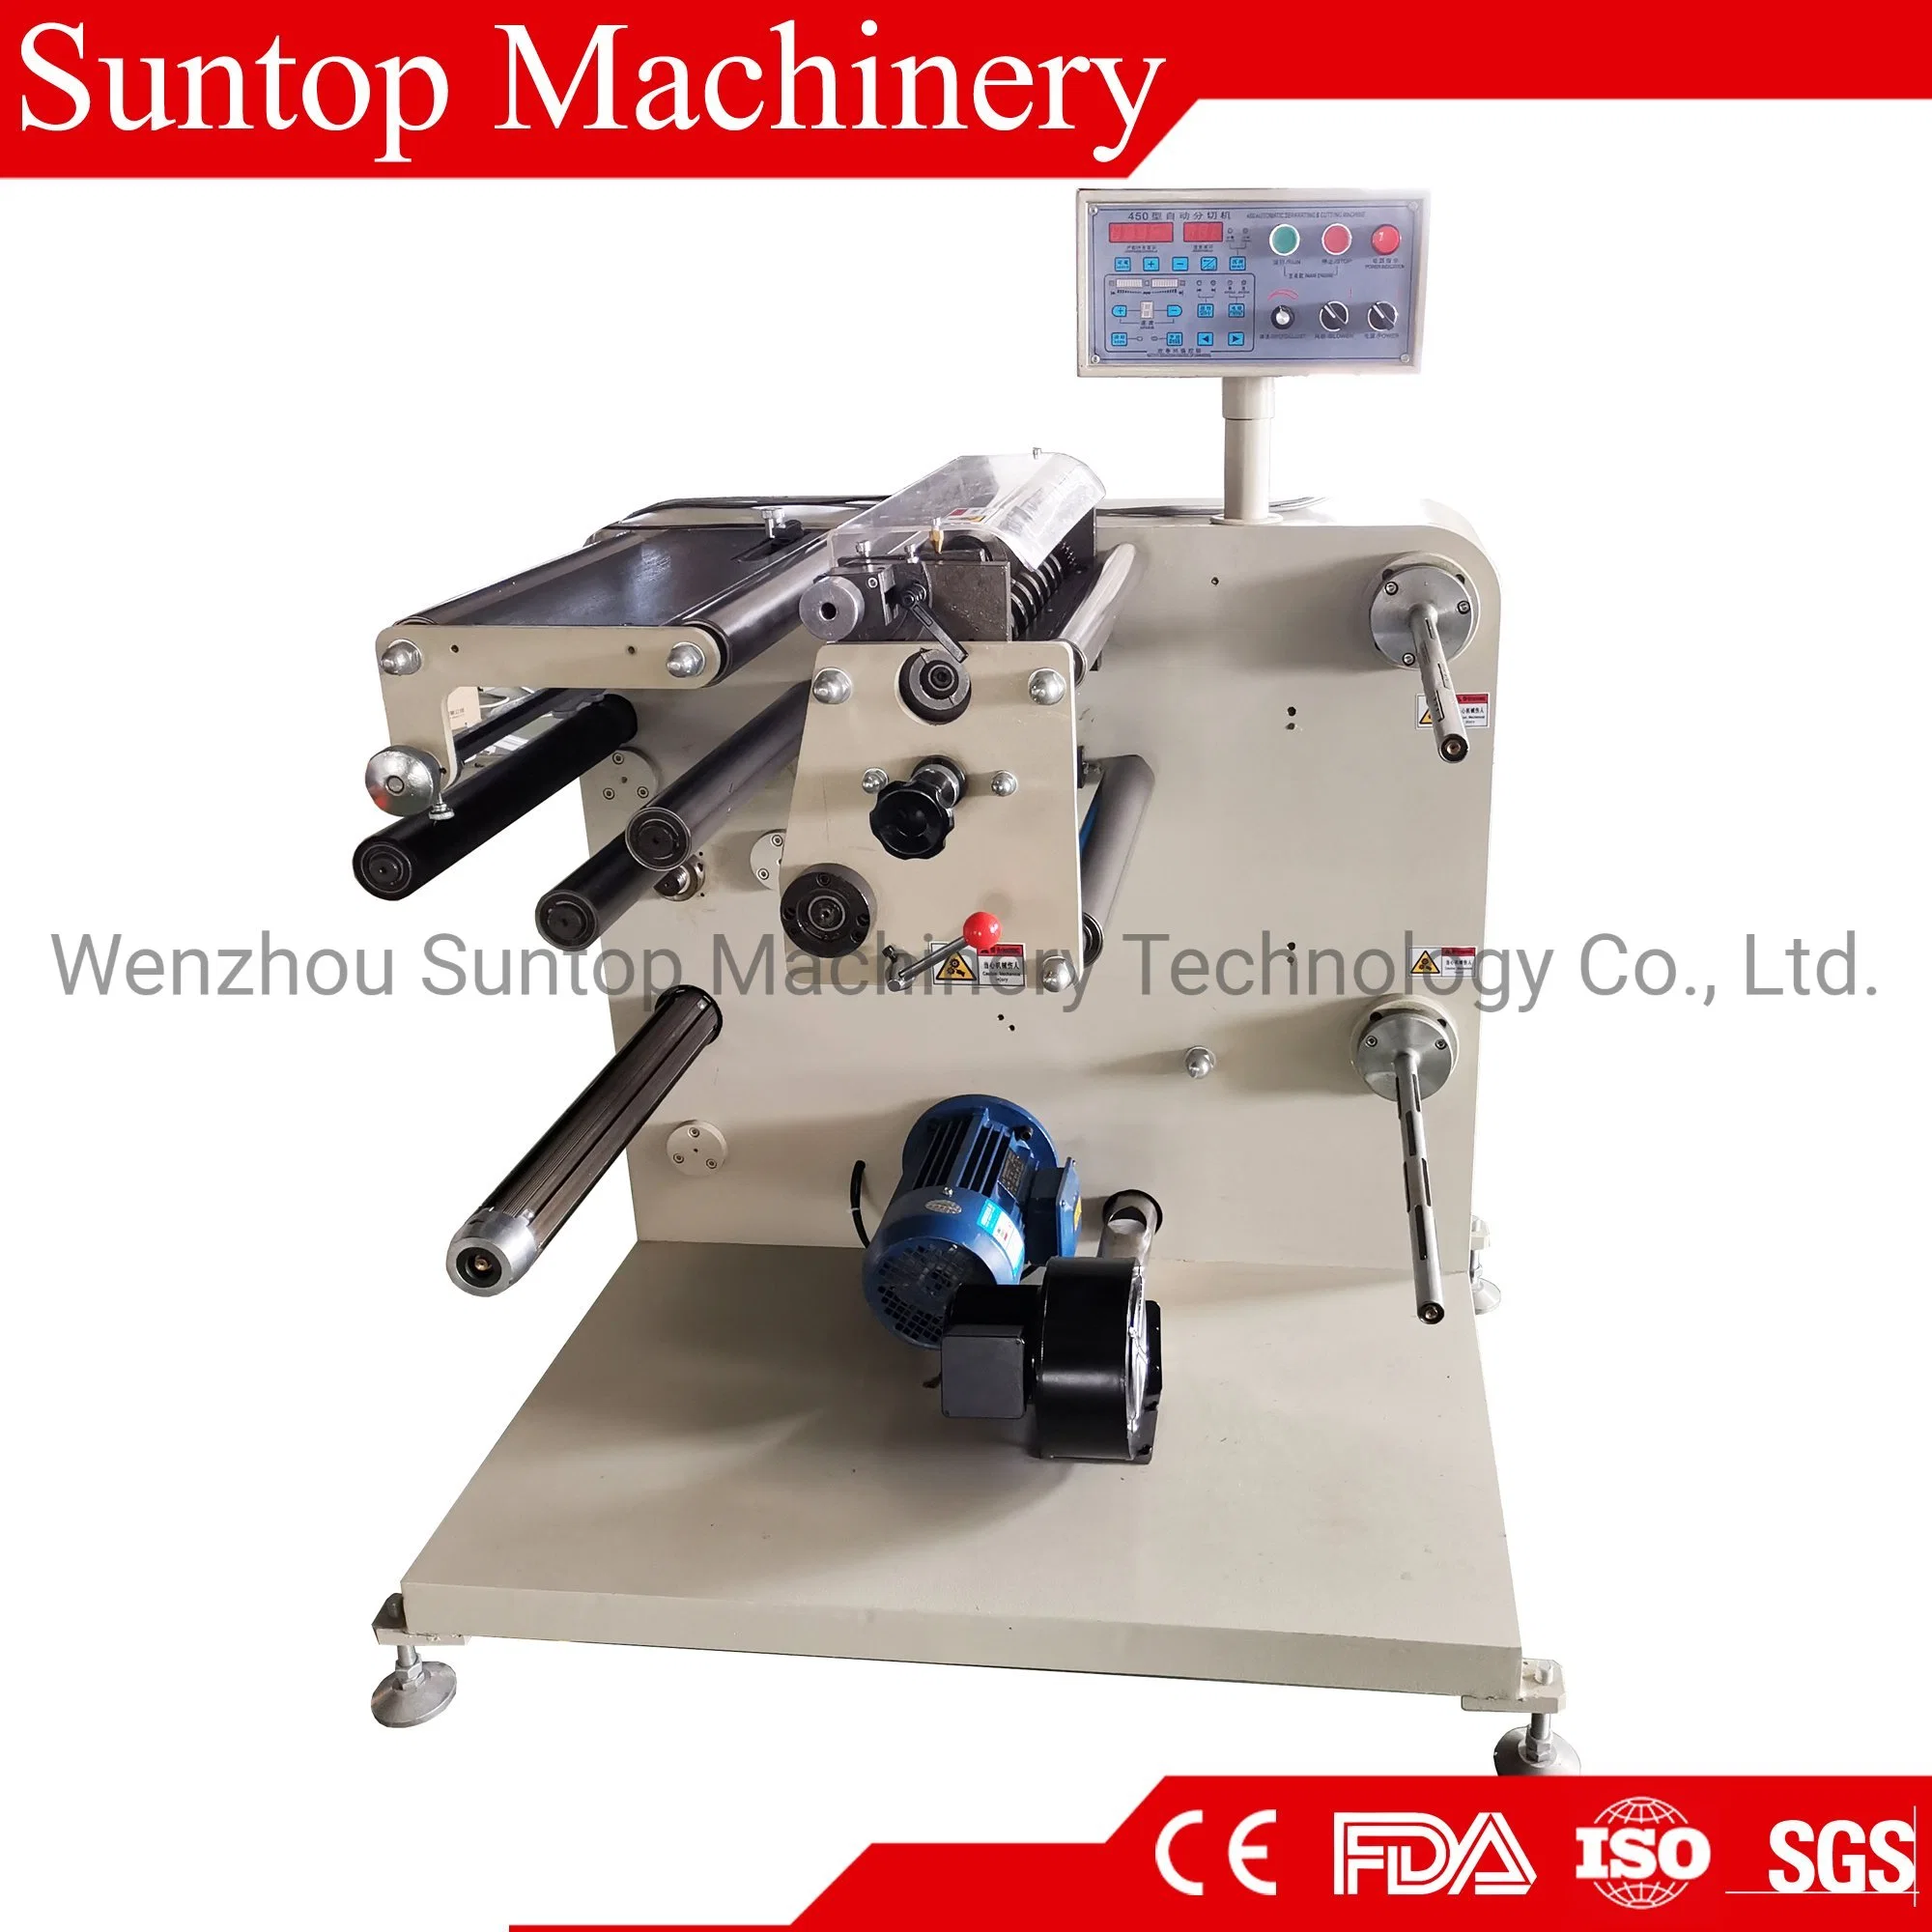 High Speed Laminating and Slitting Machine for Paper and Film Slitting Cutting, Die, Foam, Film, Adhesive Cutting and Rewinding Slitter and Rewinder